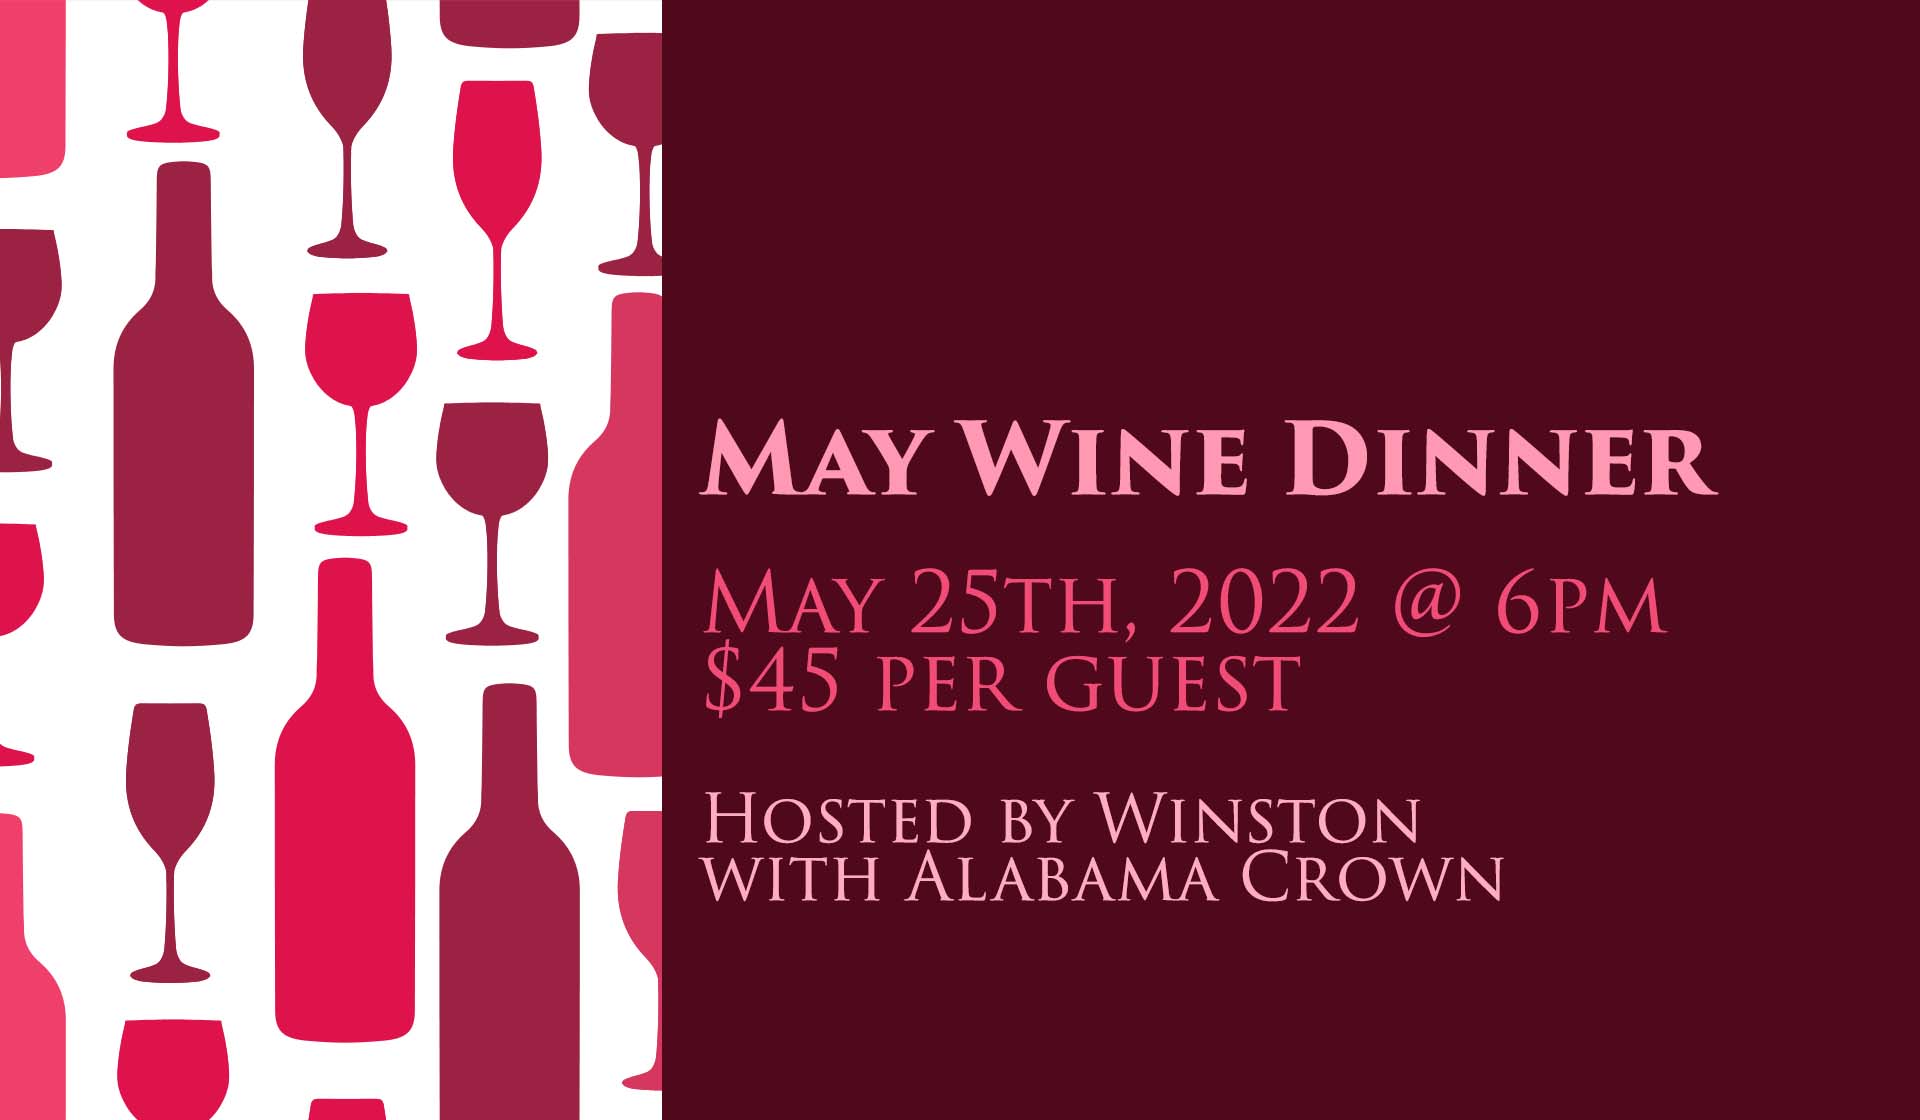 View the details for Ginny Lane's upcoming wine dinner